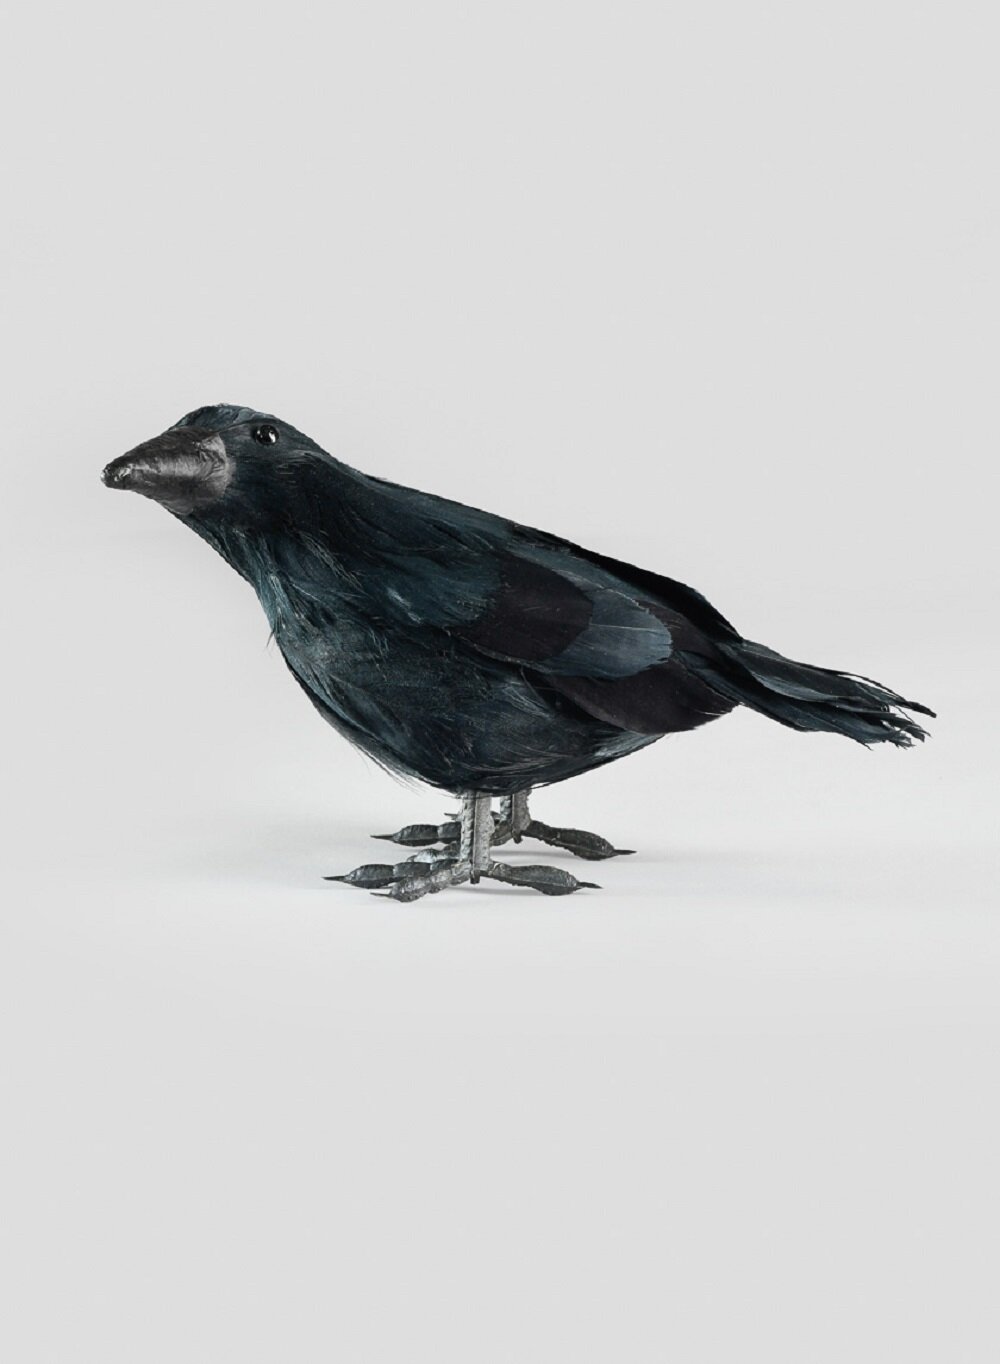 5" Black Crow One Small Bird Feathered Raven Spooky Prop Decoration Decor 